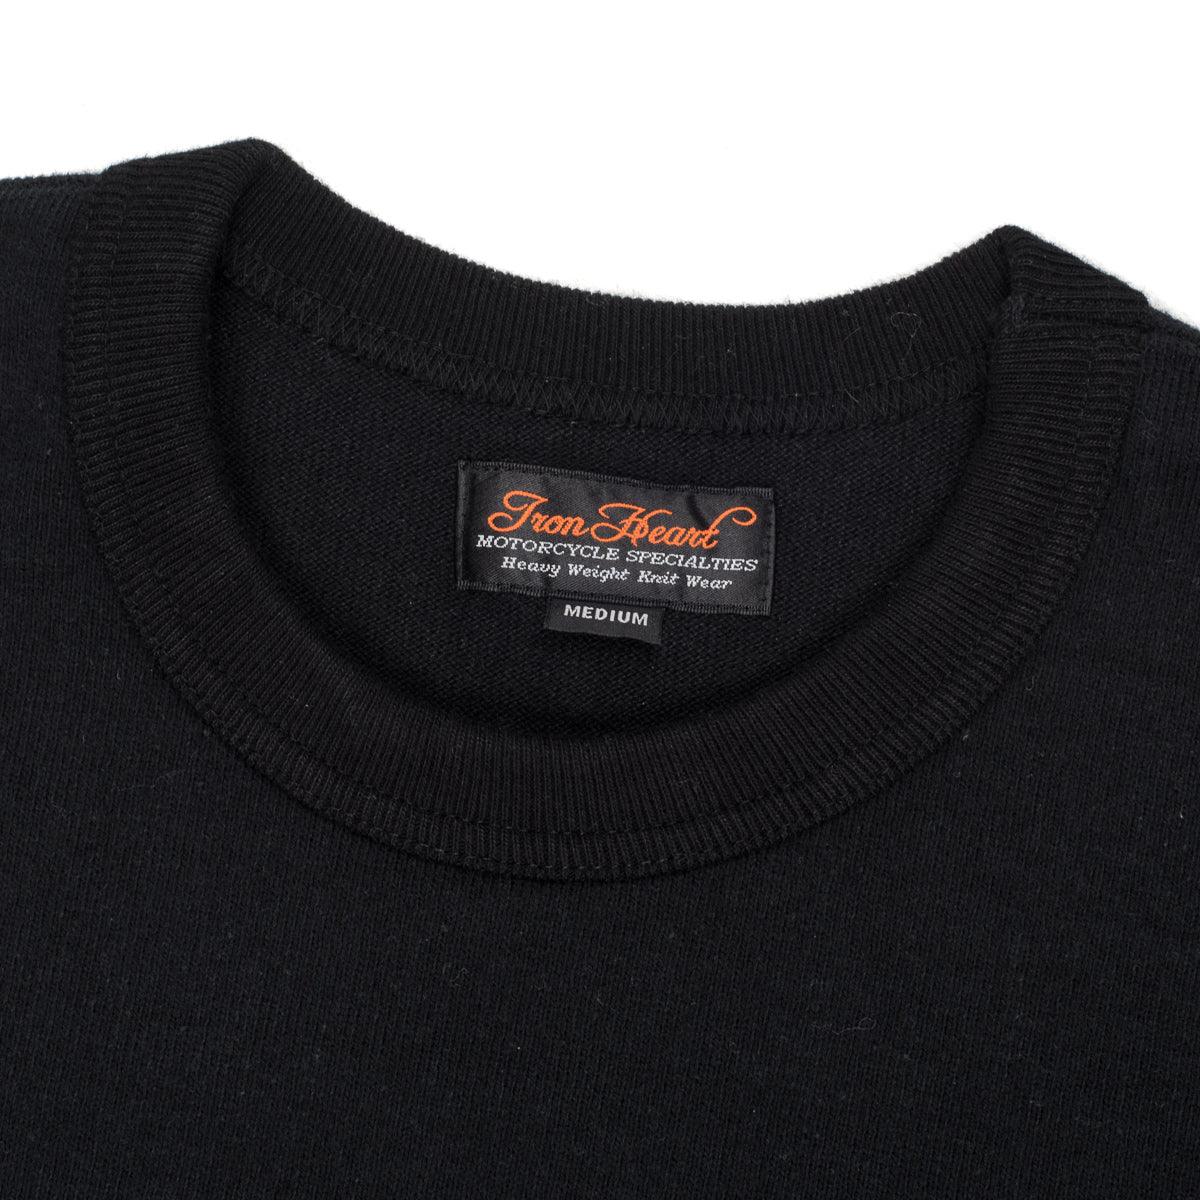 Image showing the IHTL-1501-BLK - 11oz Crew Neck Sweater Black which is a Sweatshirts described by the following info Iron Heart, Released, Sweatshirts, Tops and sold on the IRON HEART GERMANY online store